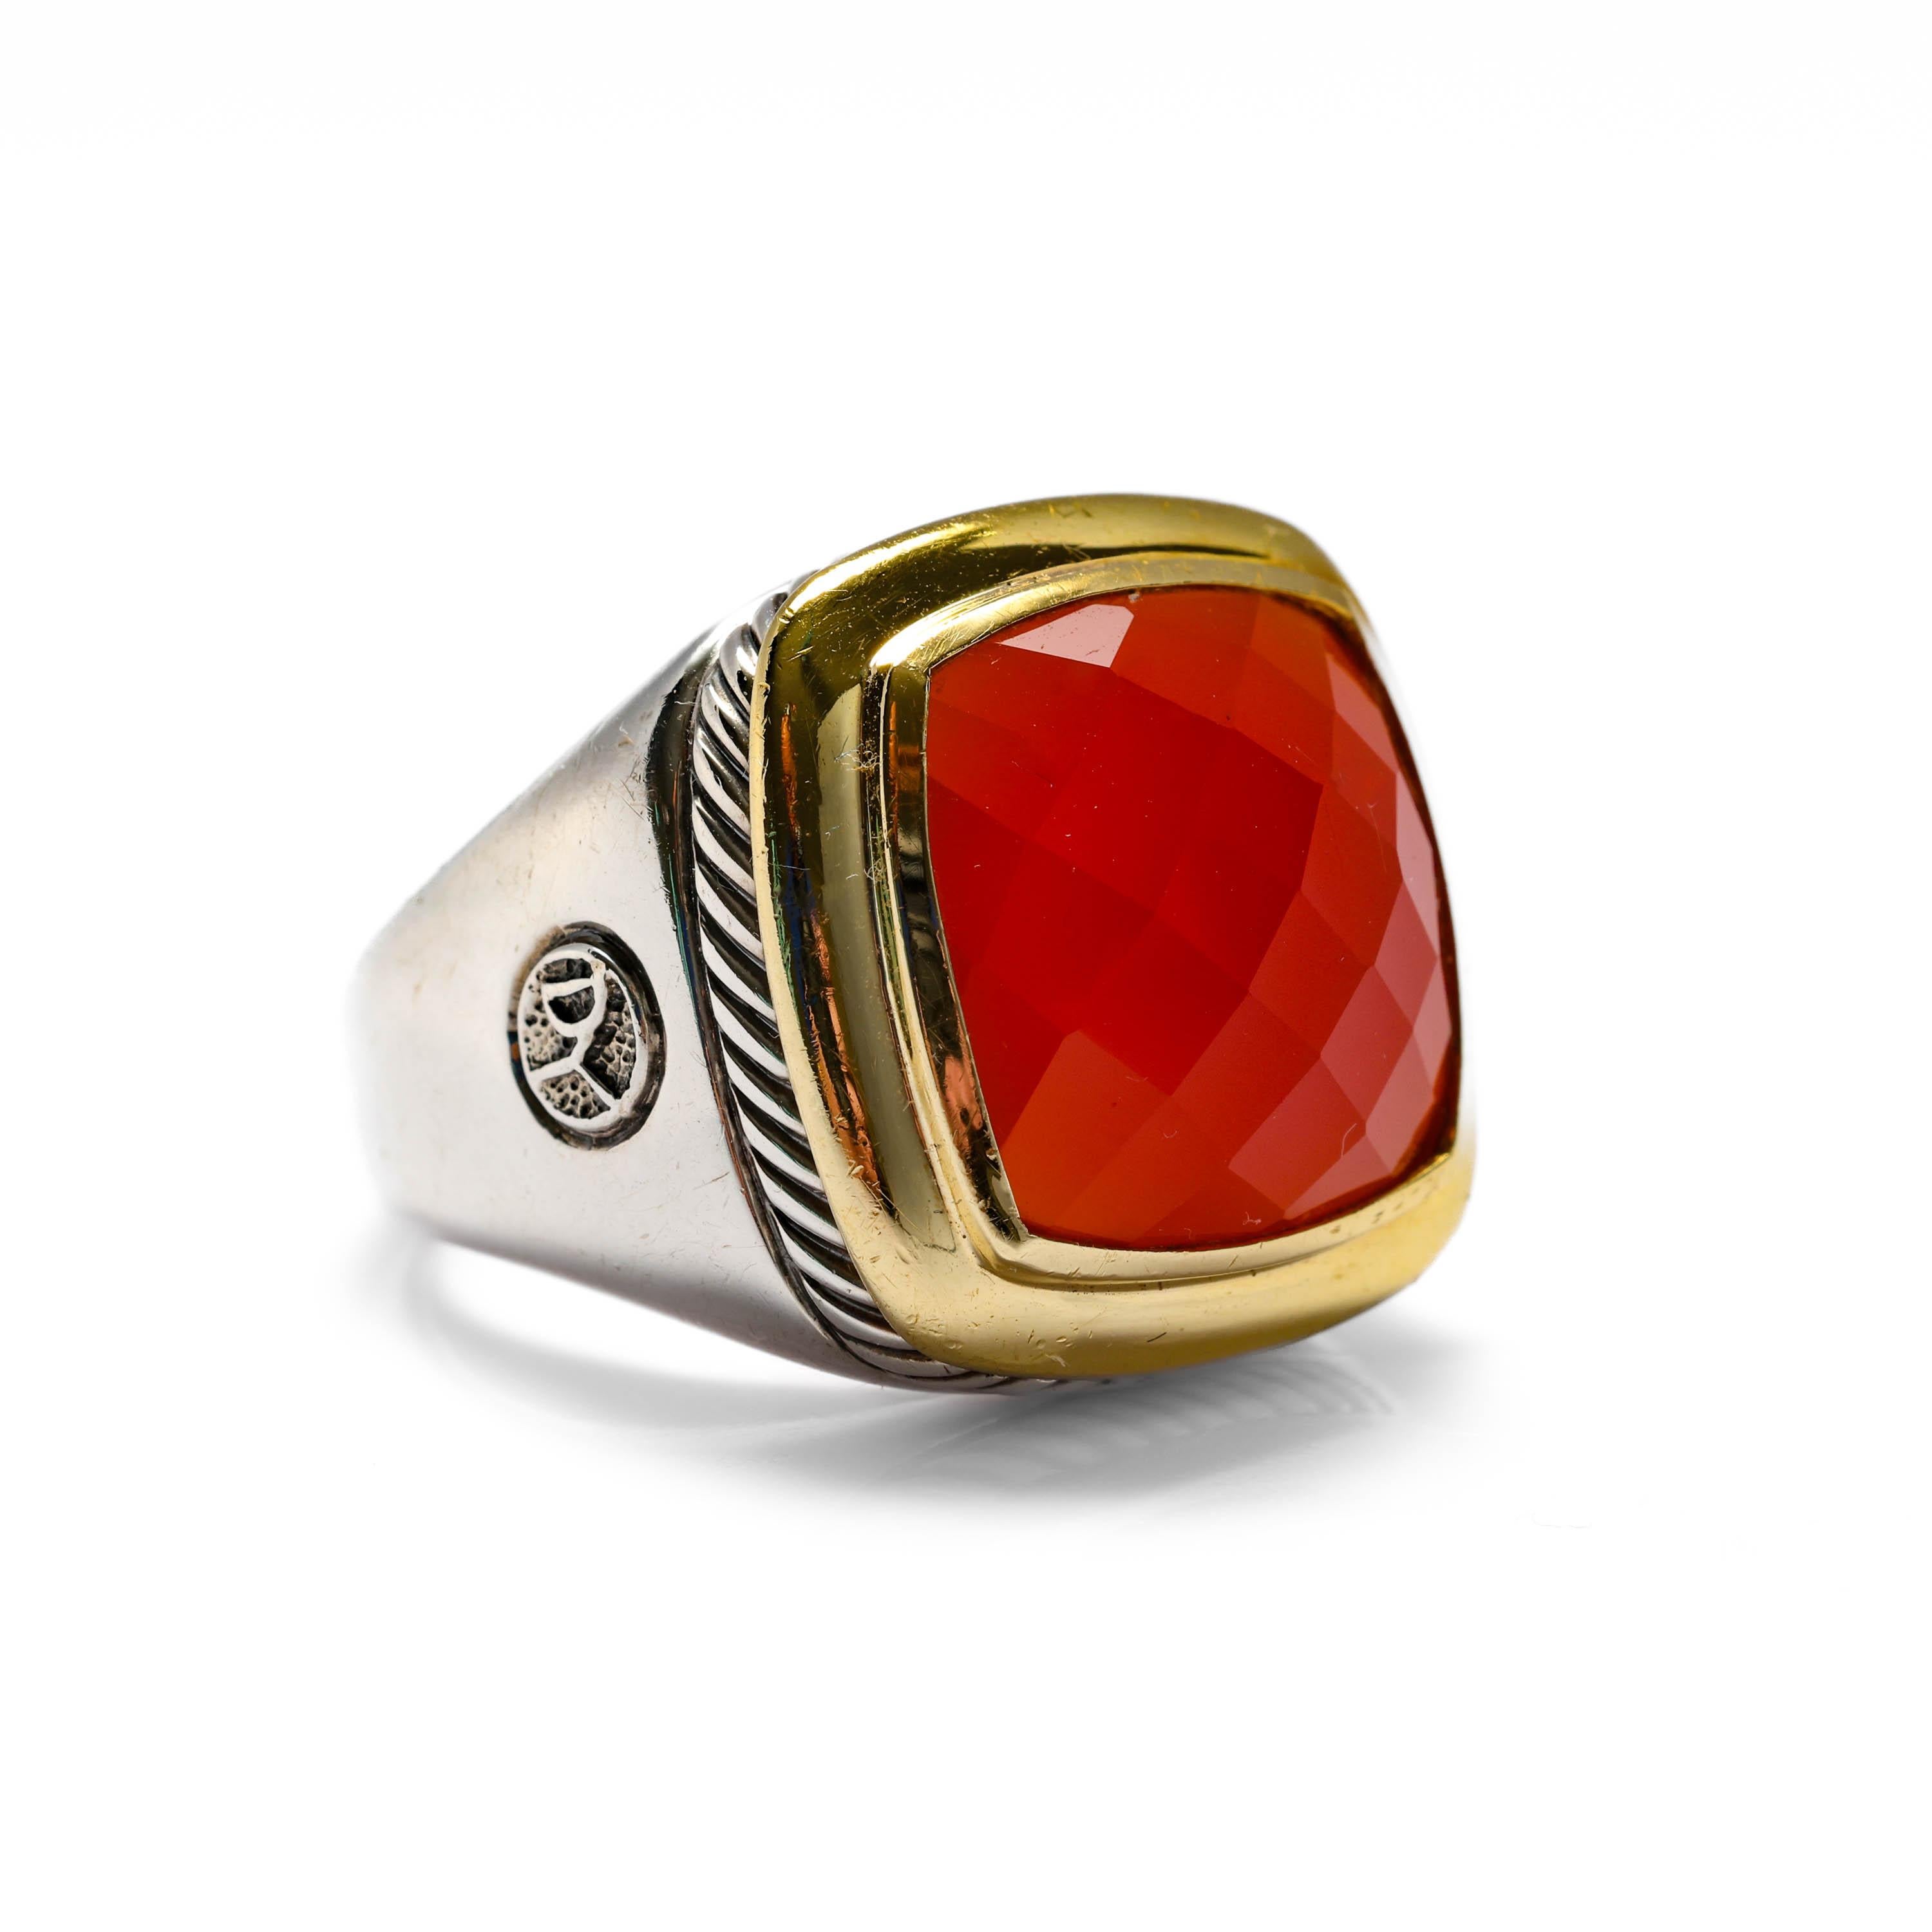 This is an iconic 1990s David Yurman sterling silver and 18K yellow gold ring featuring a faceted carnelian gemstone. The 15mm square carnelian gem is translucent and luminous.

This vintage ring is in excellent condition with no chips or damage to